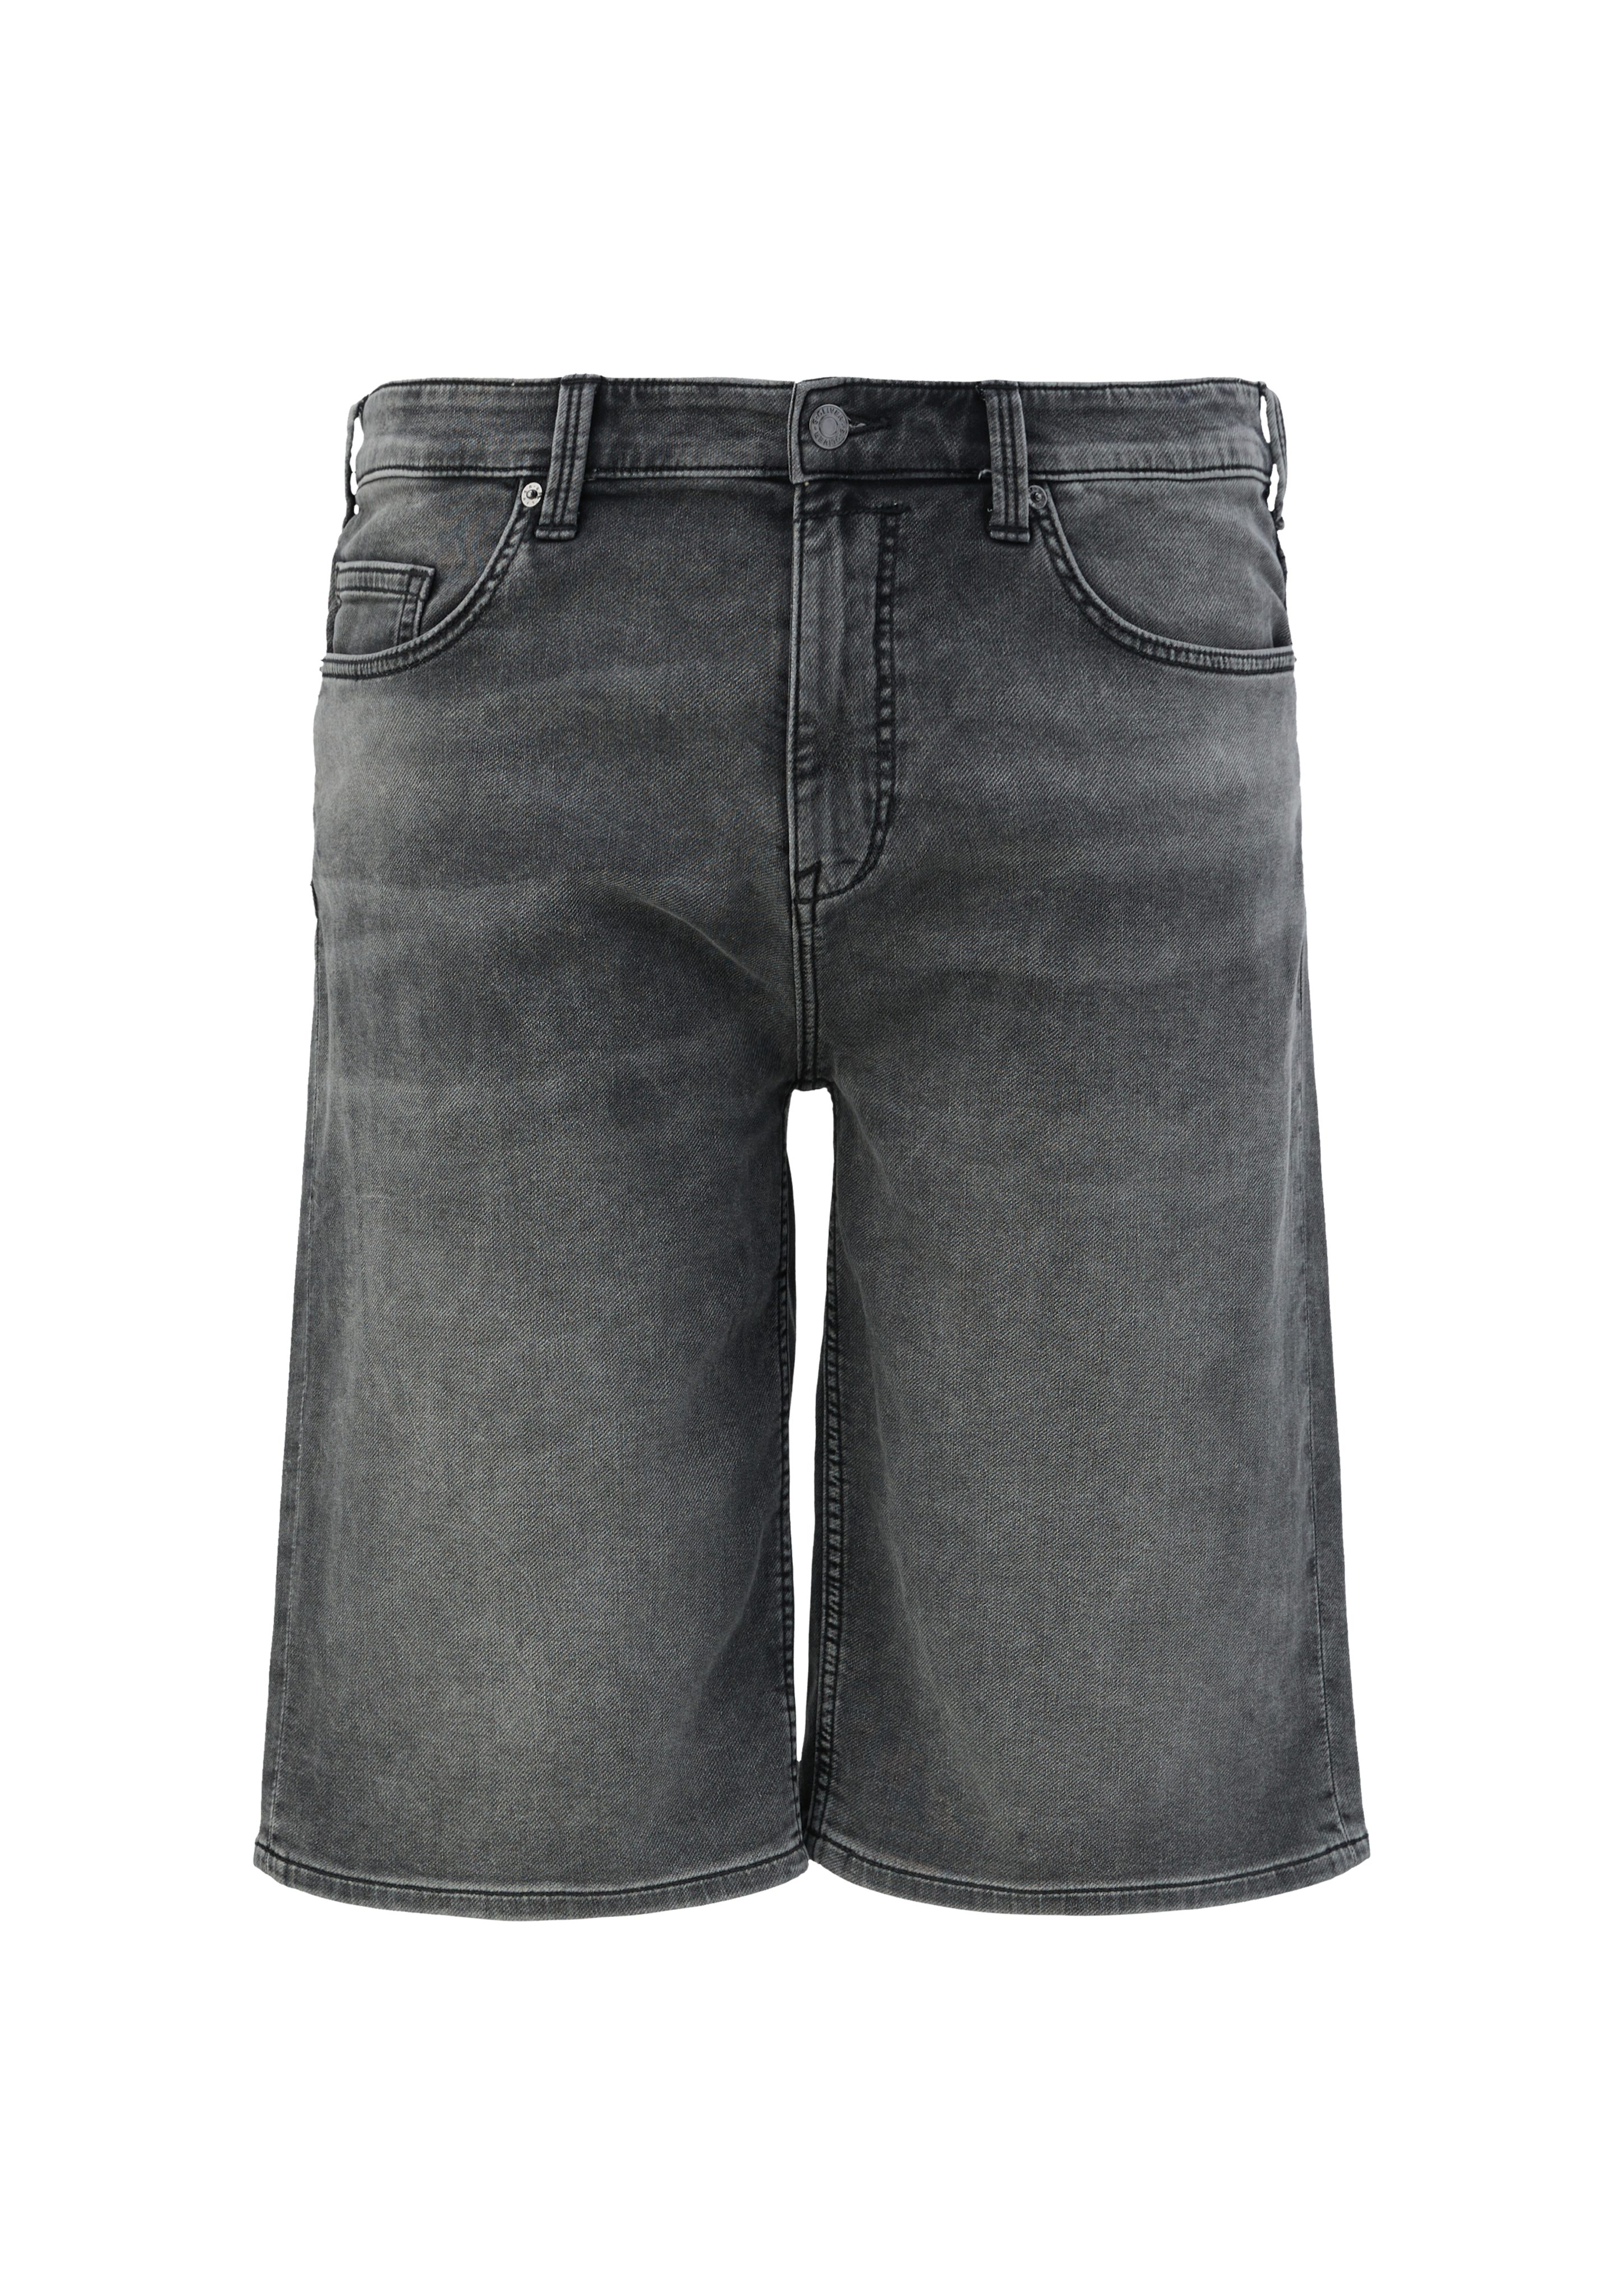 / Rise Jeansshorts Relaxed steingrau Casby Leg Fit / s.Oliver / Mid Jeans-Shorts Straight